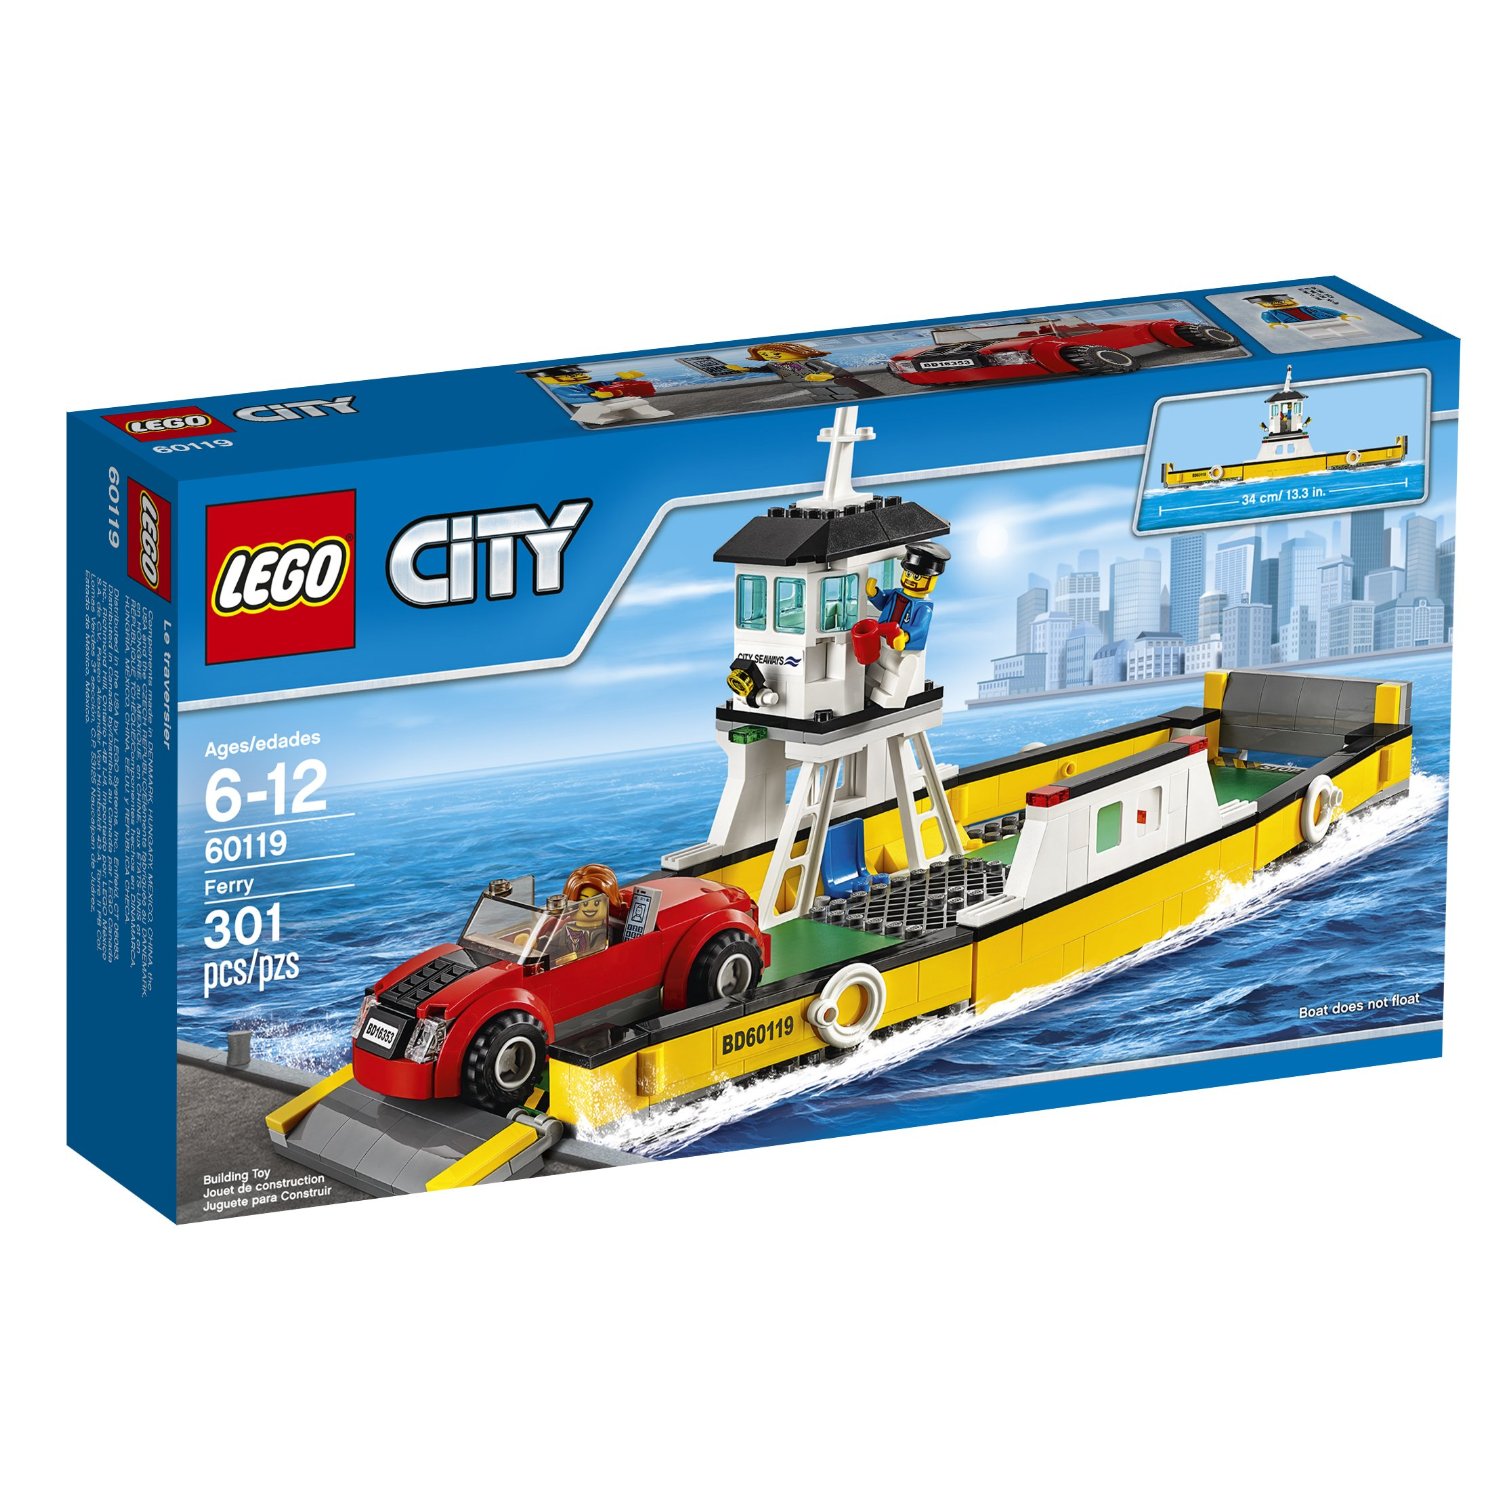 LEGO CITY Ferry – Just $19.19!